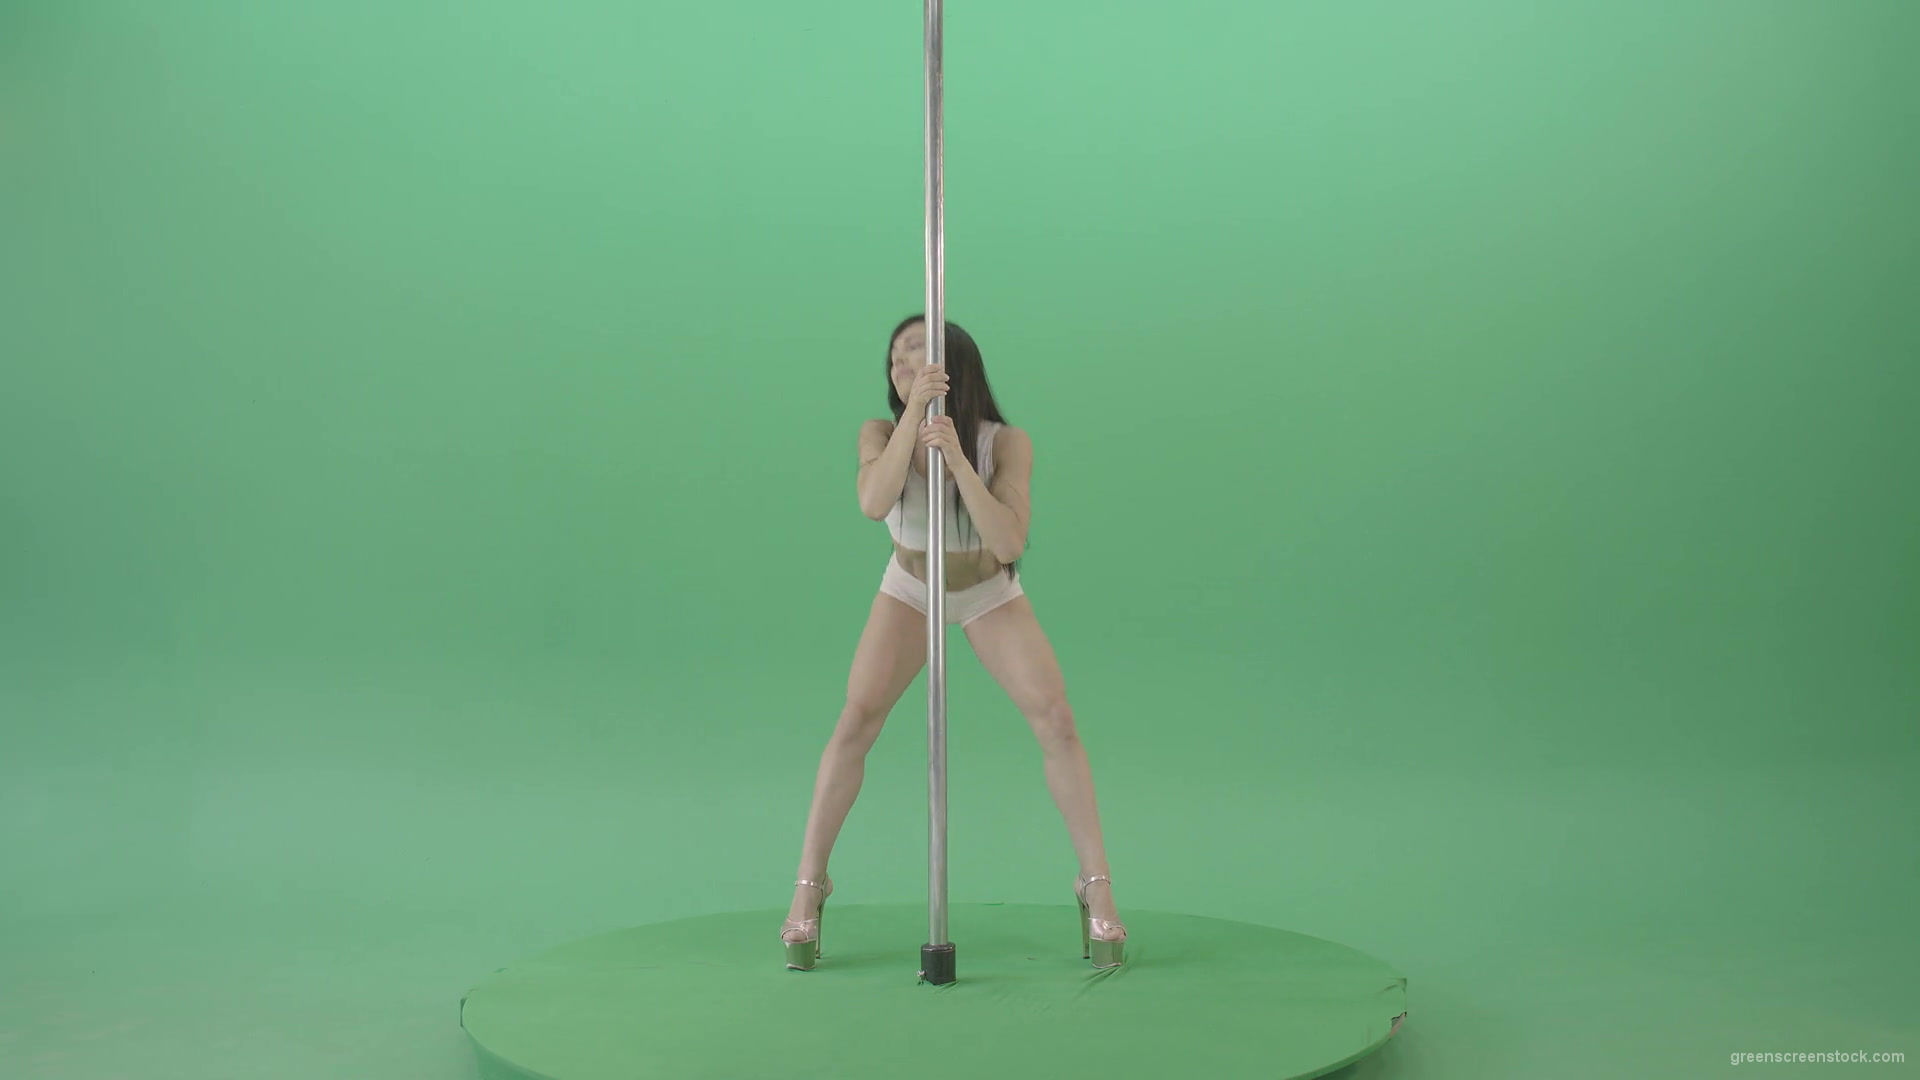 Pole-Dance-sport-girl-waving-sexy-body-isolated-on-green-screen-4K-Video-Footage-1920_005 Green Screen Stock